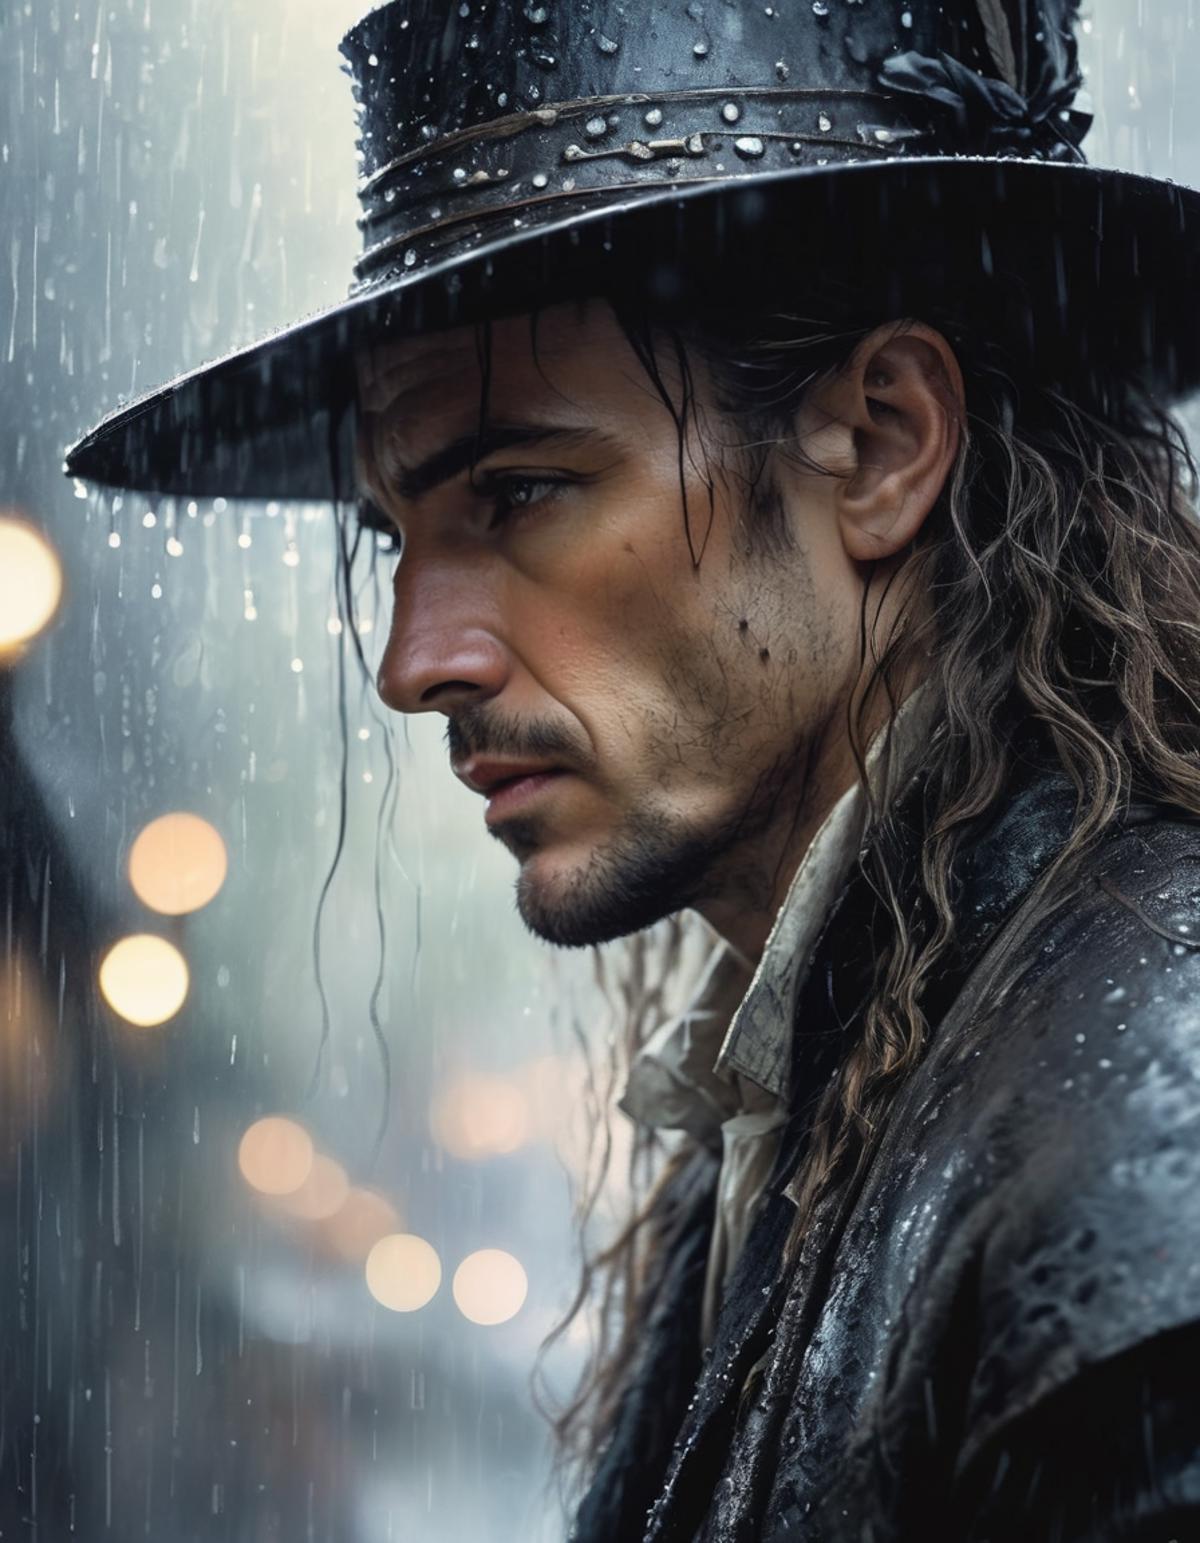 Man with long hair and a hat, looking down, in the rain, wearing a black coat.